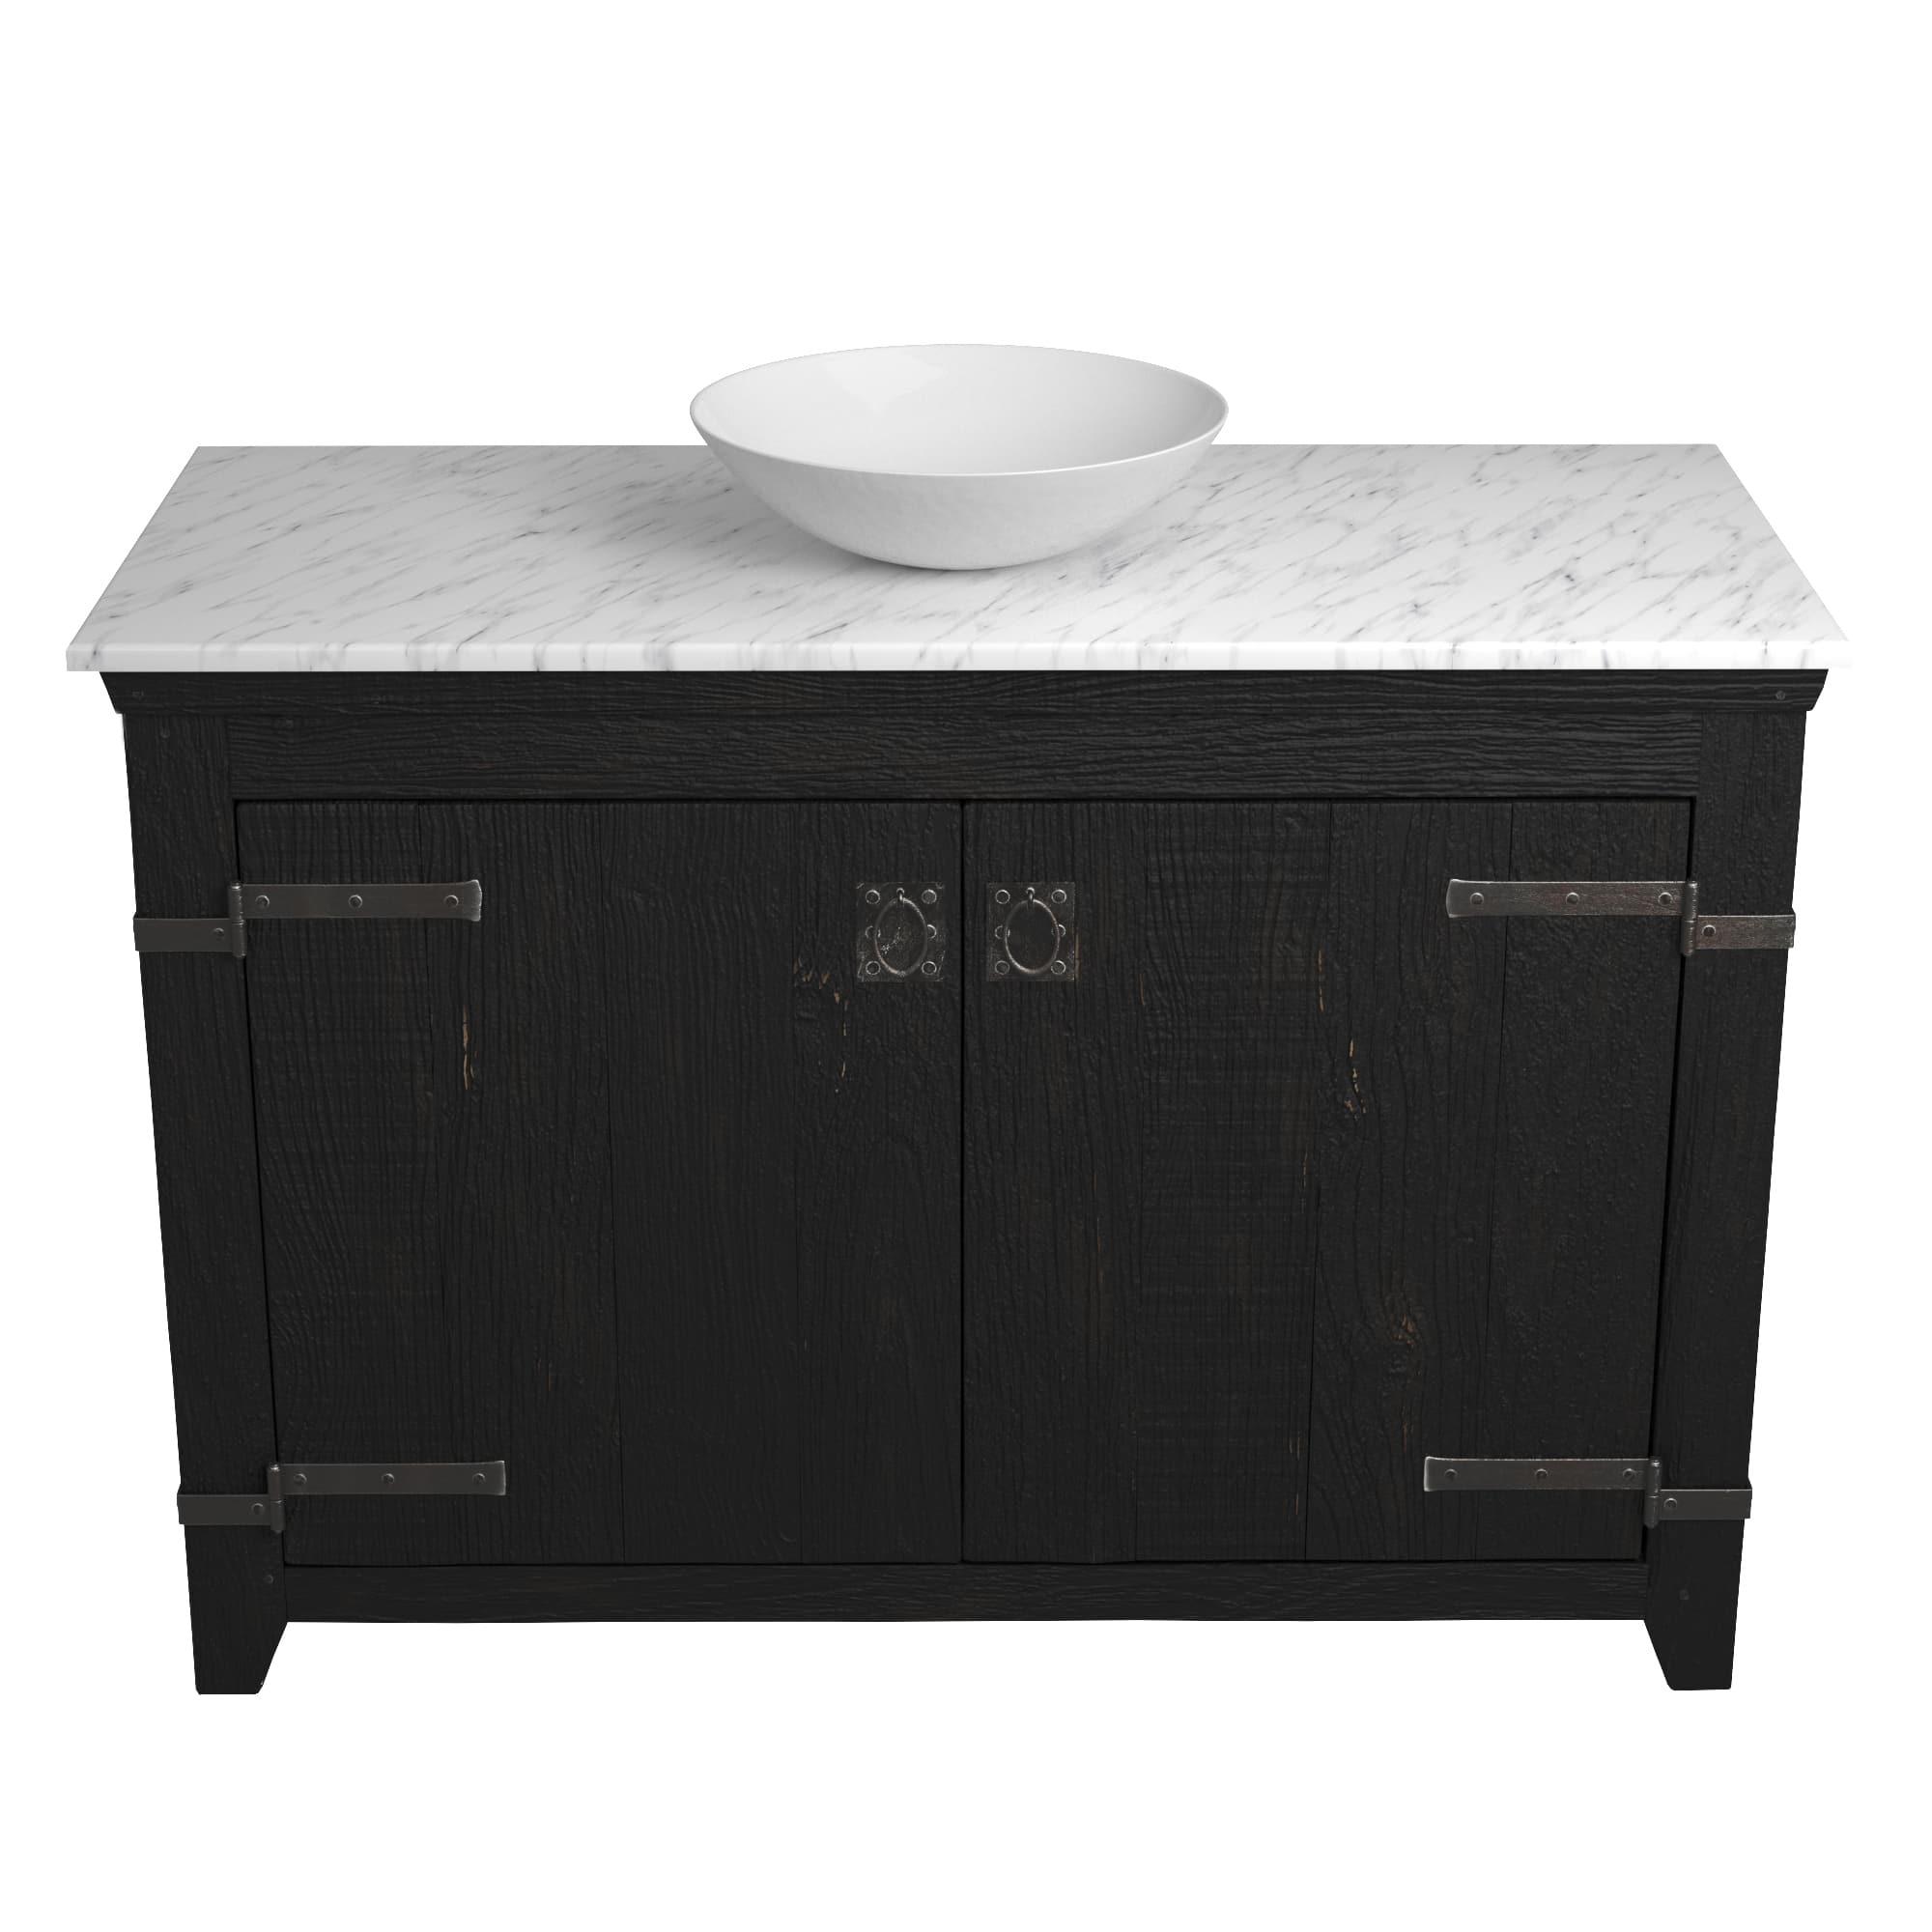 Native Trails 48" Americana Vanity in Anvil with Carrara Marble Top and Verona in Bianco, No Faucet Hole, BND48-VB-CT-MG-078